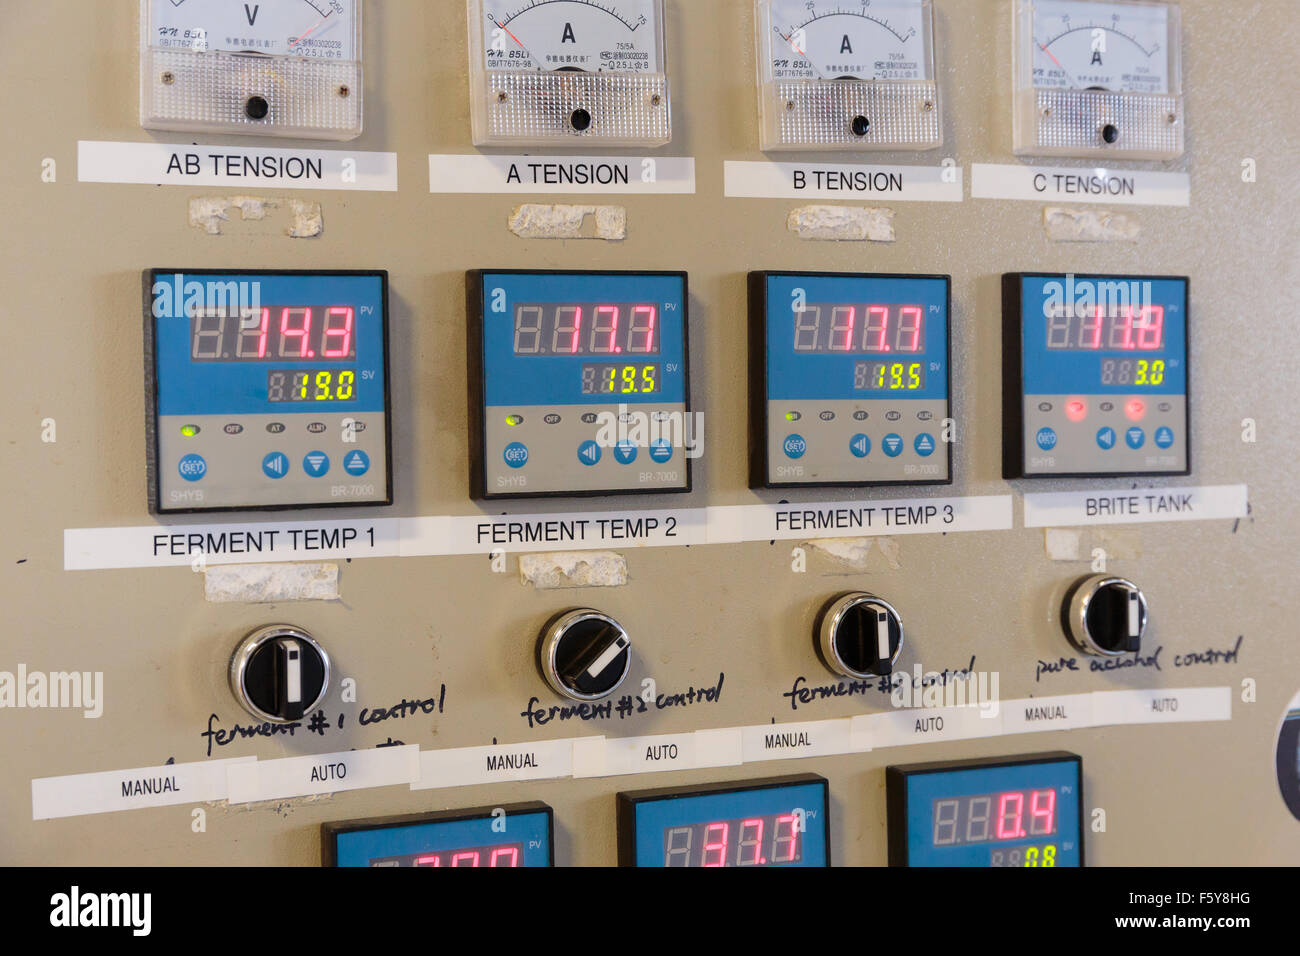 EUGENE, OR - NOVEMBER 4, 2015: Electrical control panel for temperature control of fermenters and mashing machines at the startu Stock Photo